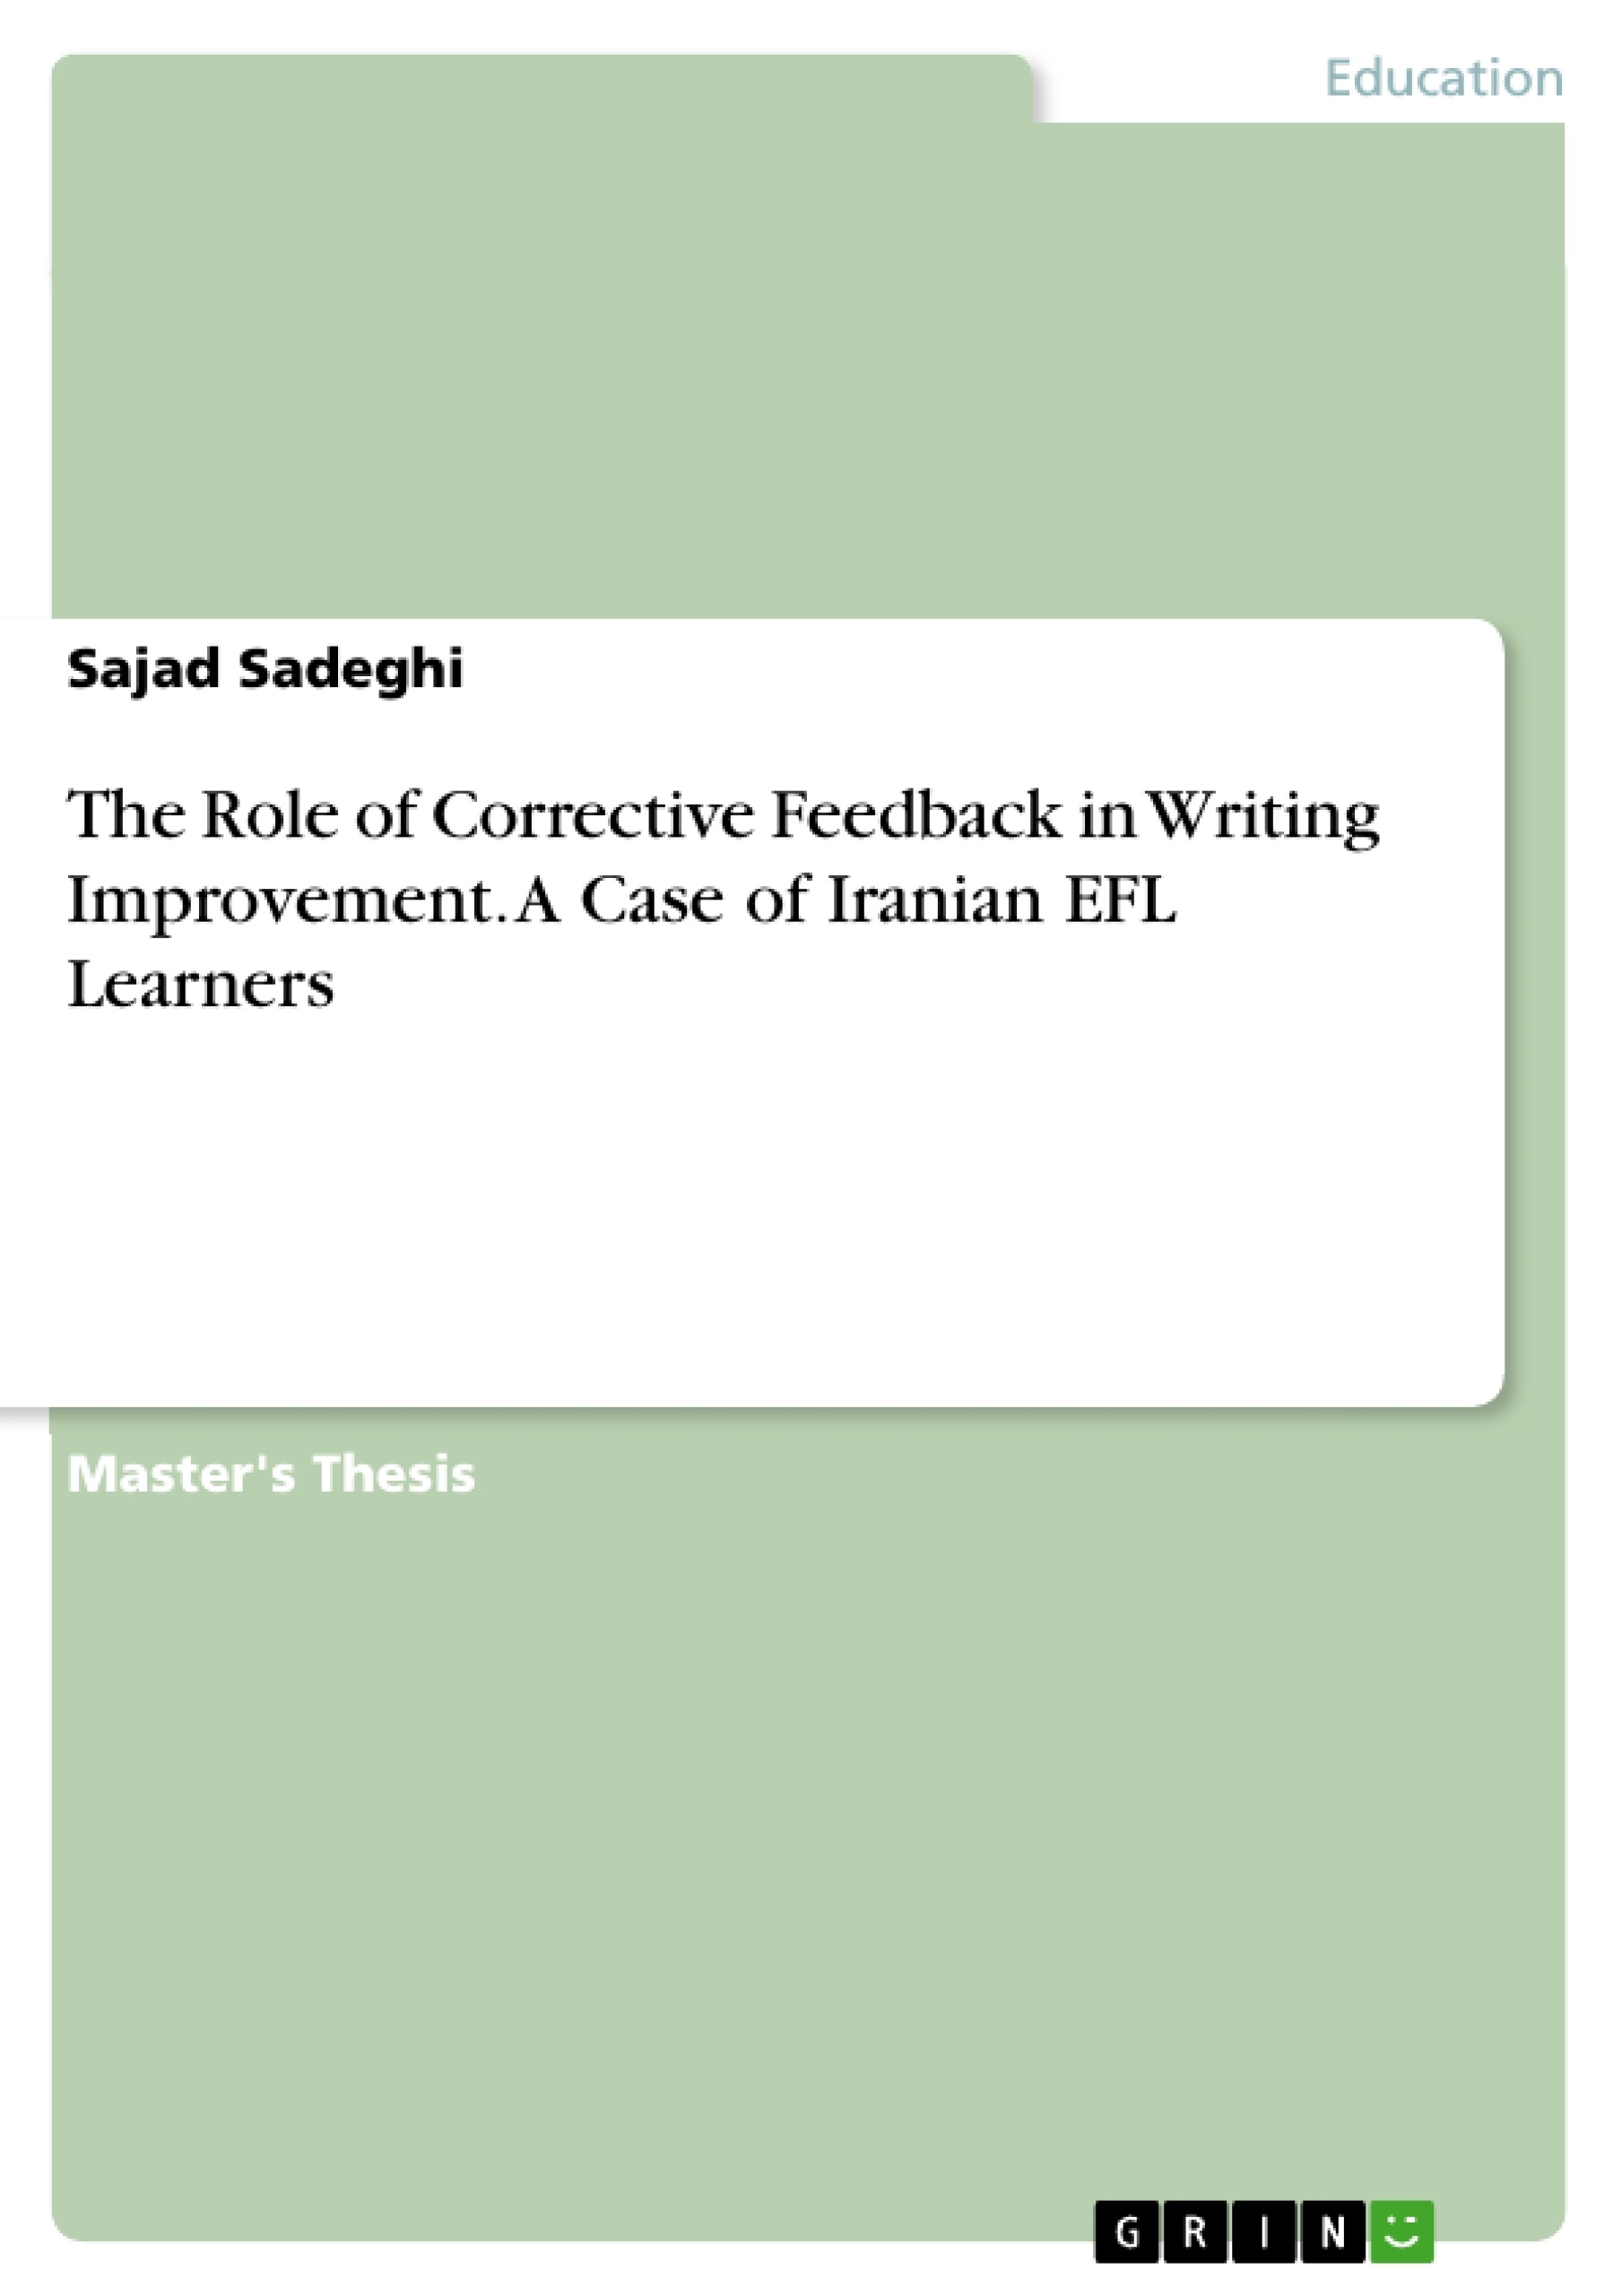 Título: The Role of Corrective Feedback in Writing Improvement. A Case of Iranian EFL Learners